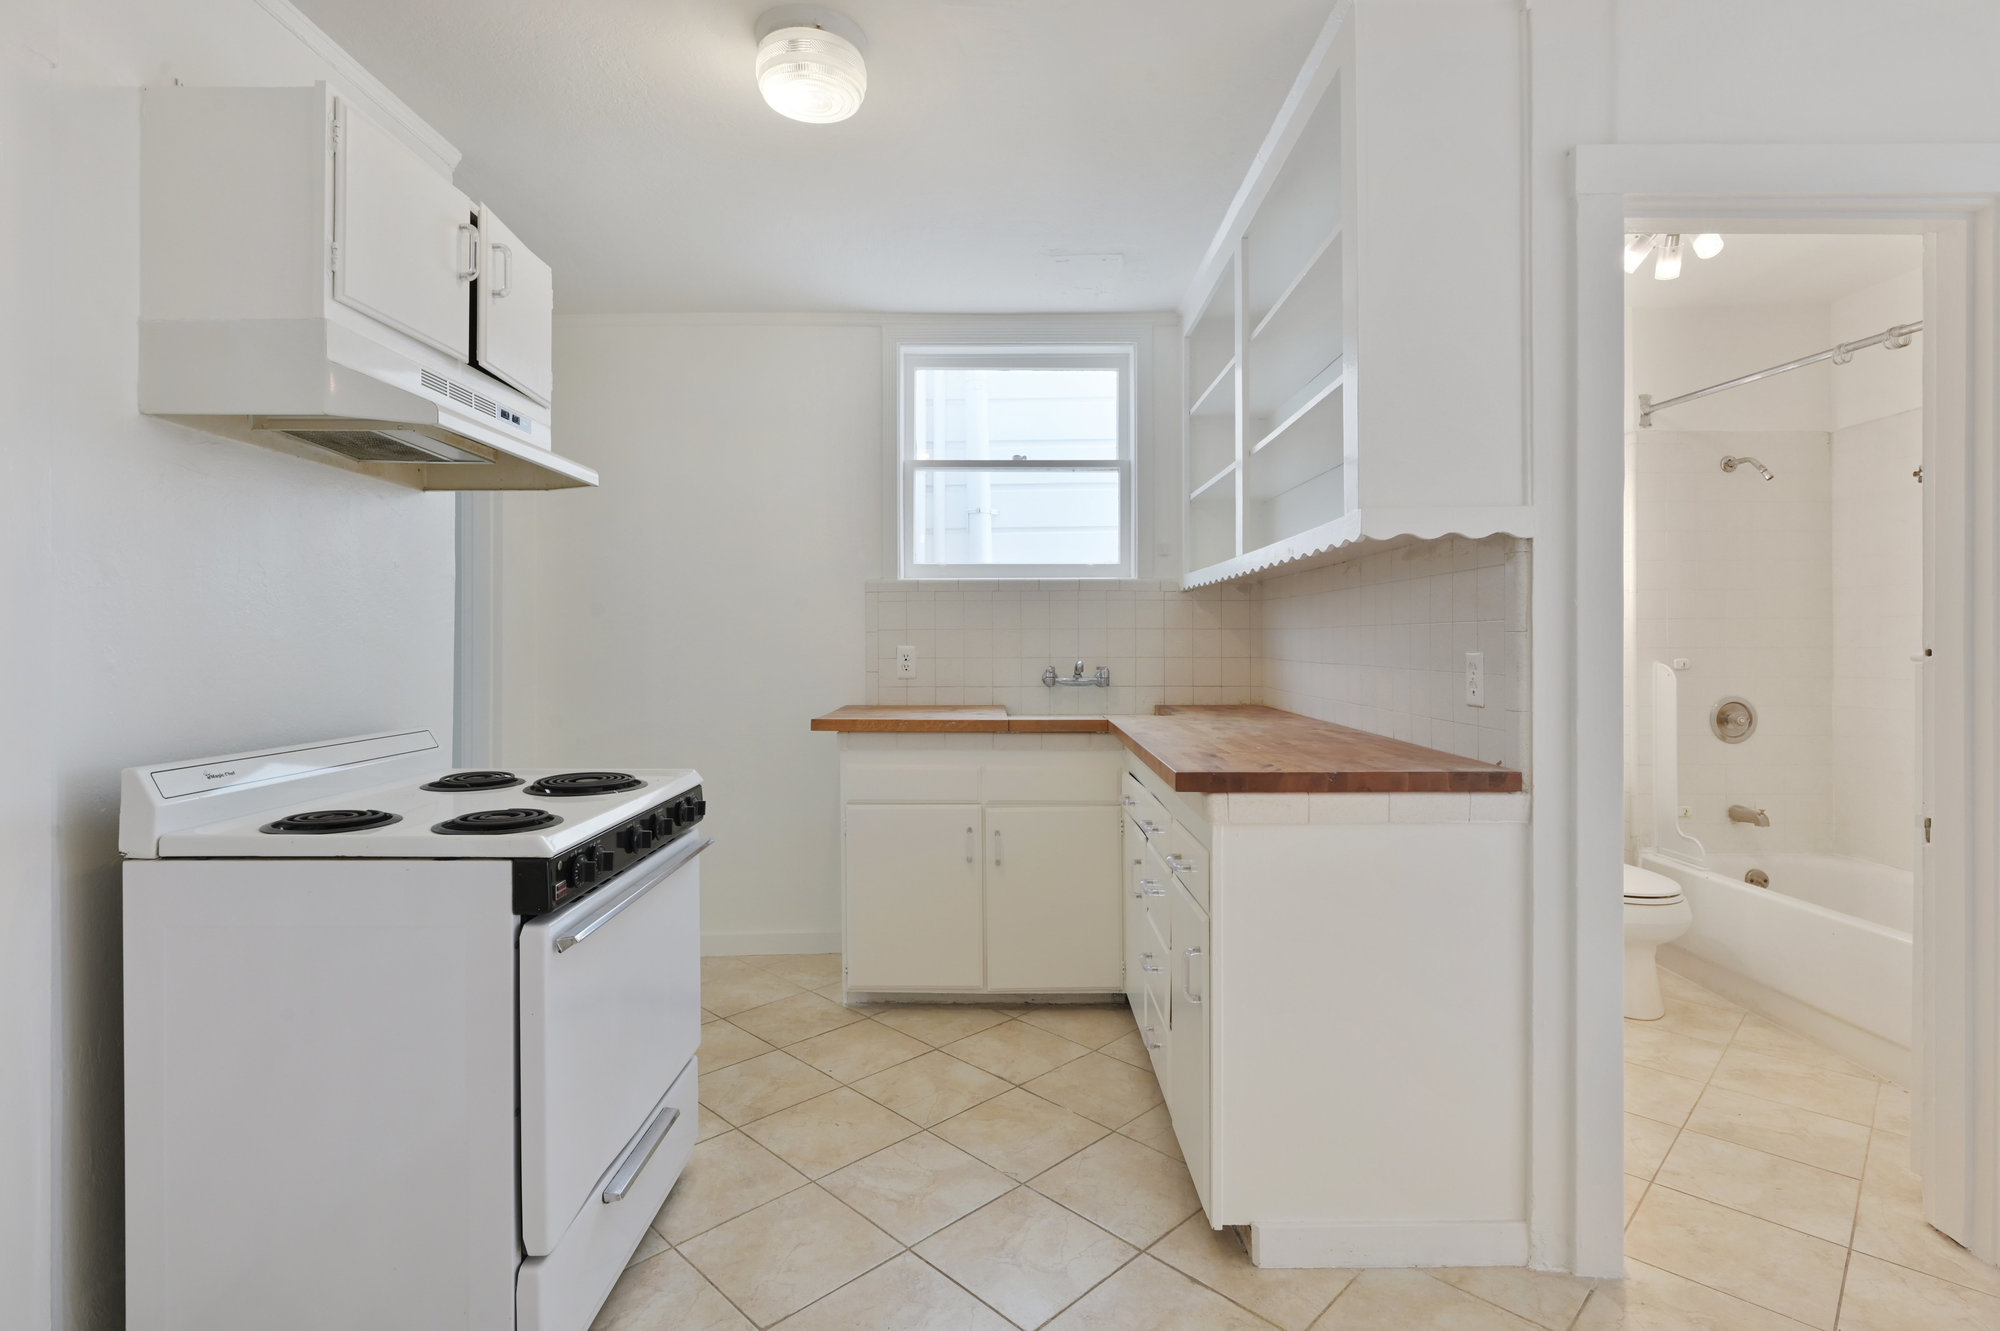 Property Photo: View of a kitchen with tiled floors